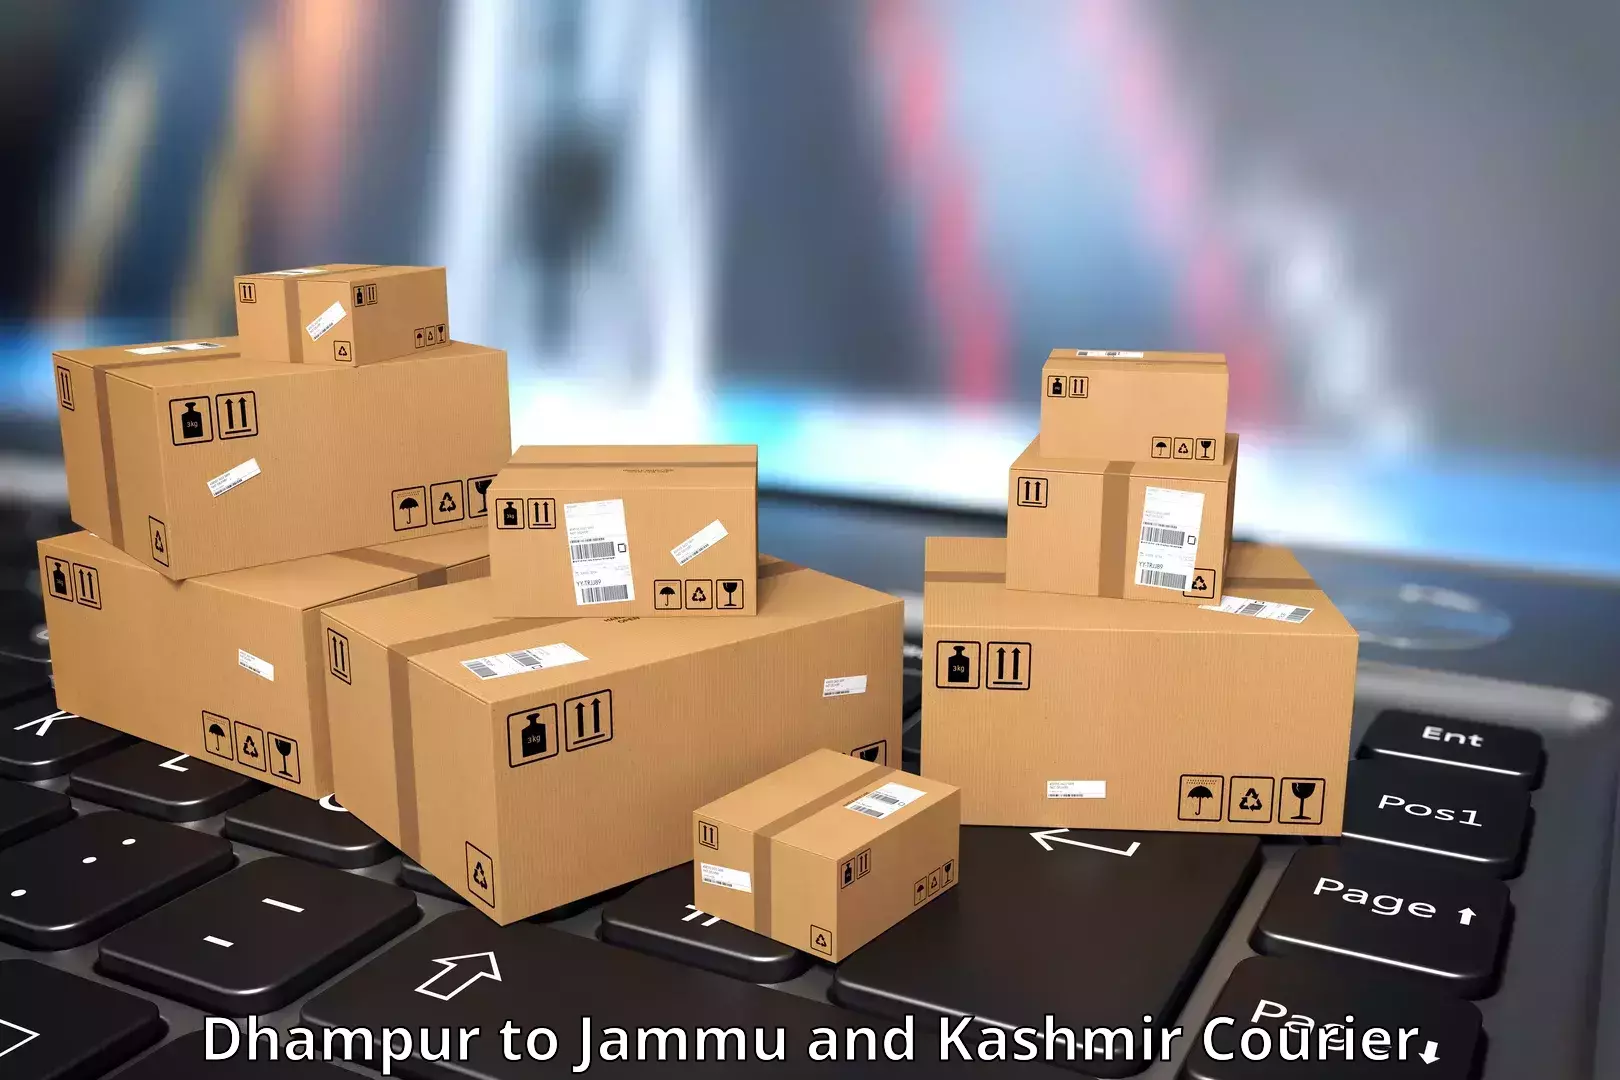 Subscription-based courier Dhampur to Jammu and Kashmir